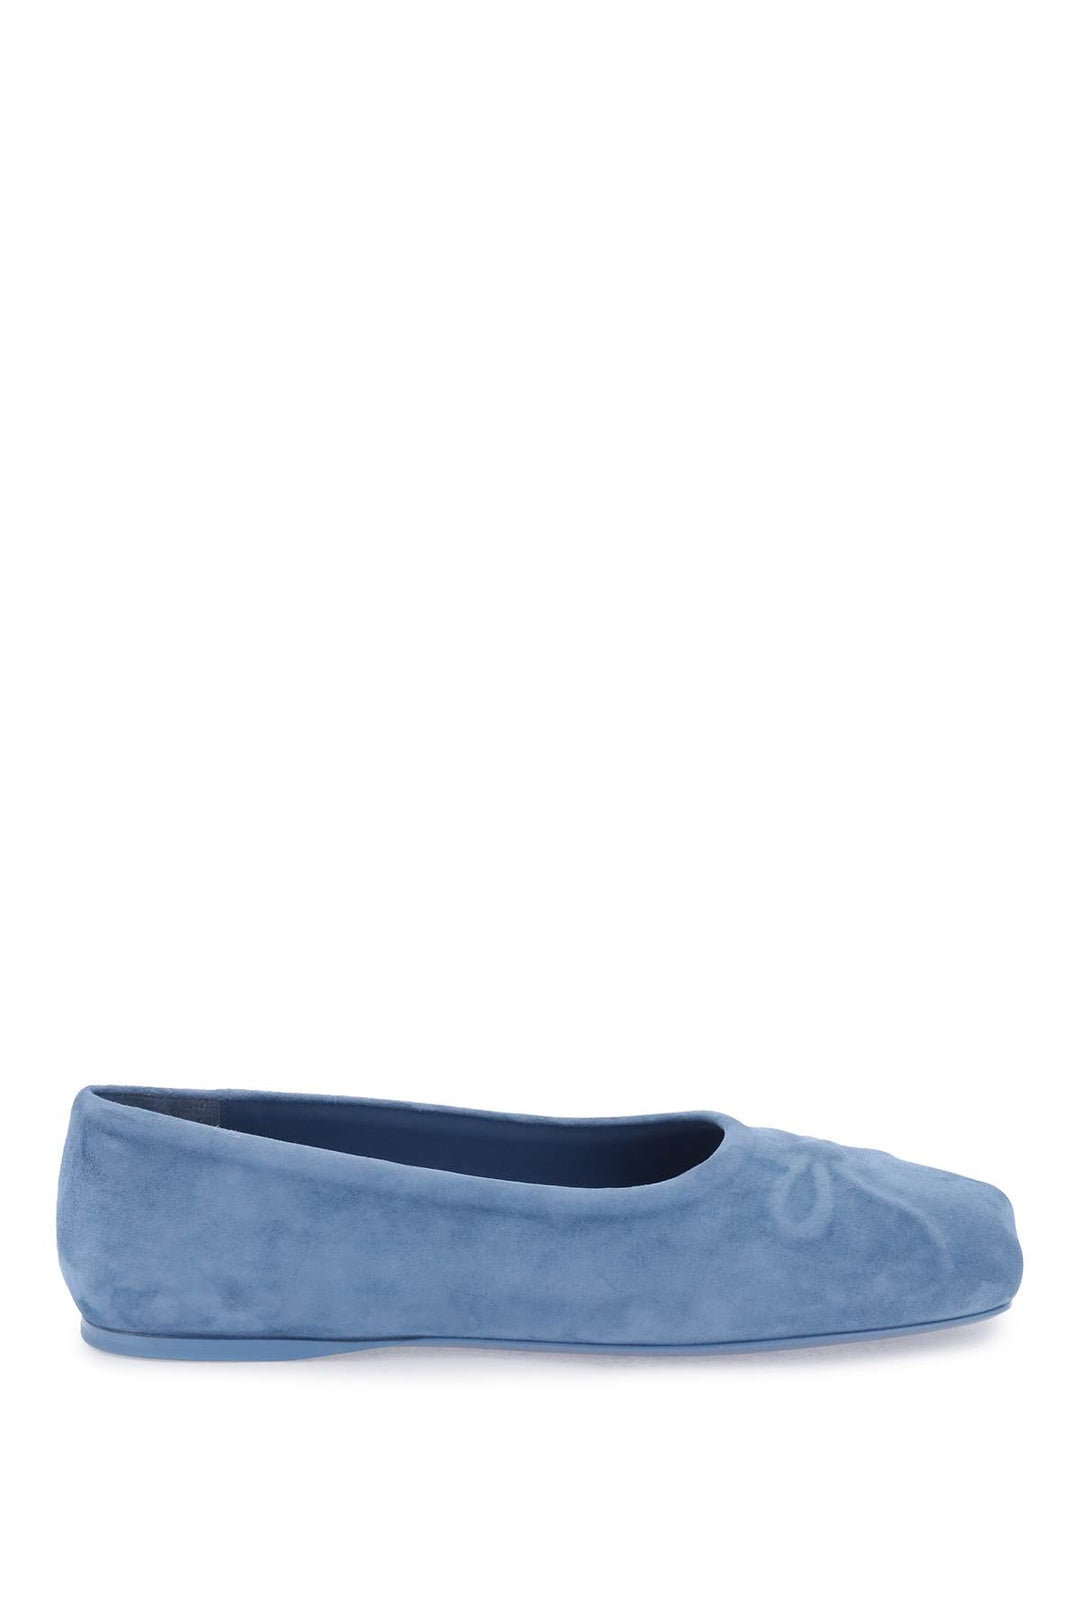 Marni Suede Little Bow Ballerina Shoes   Blu